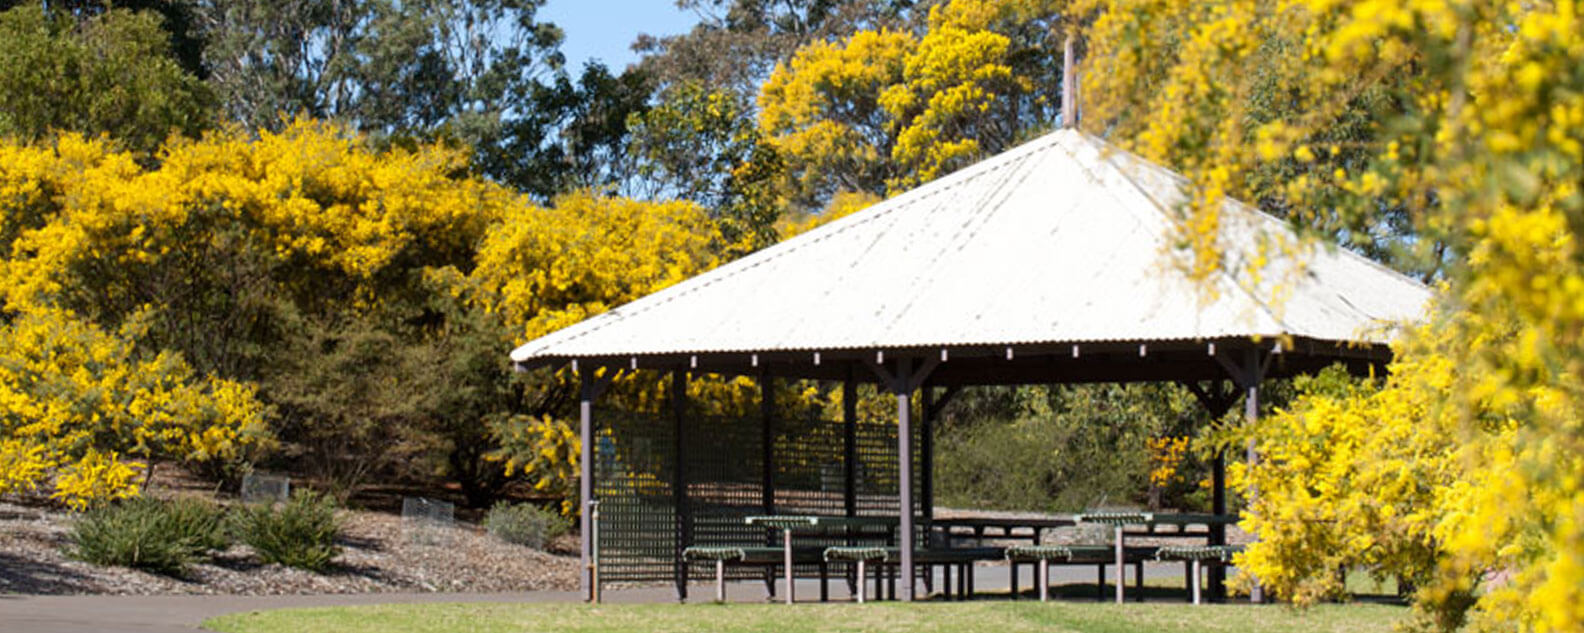 The Wattle Garden Picnic Shelter surrounded by Golden Wattle in bloom